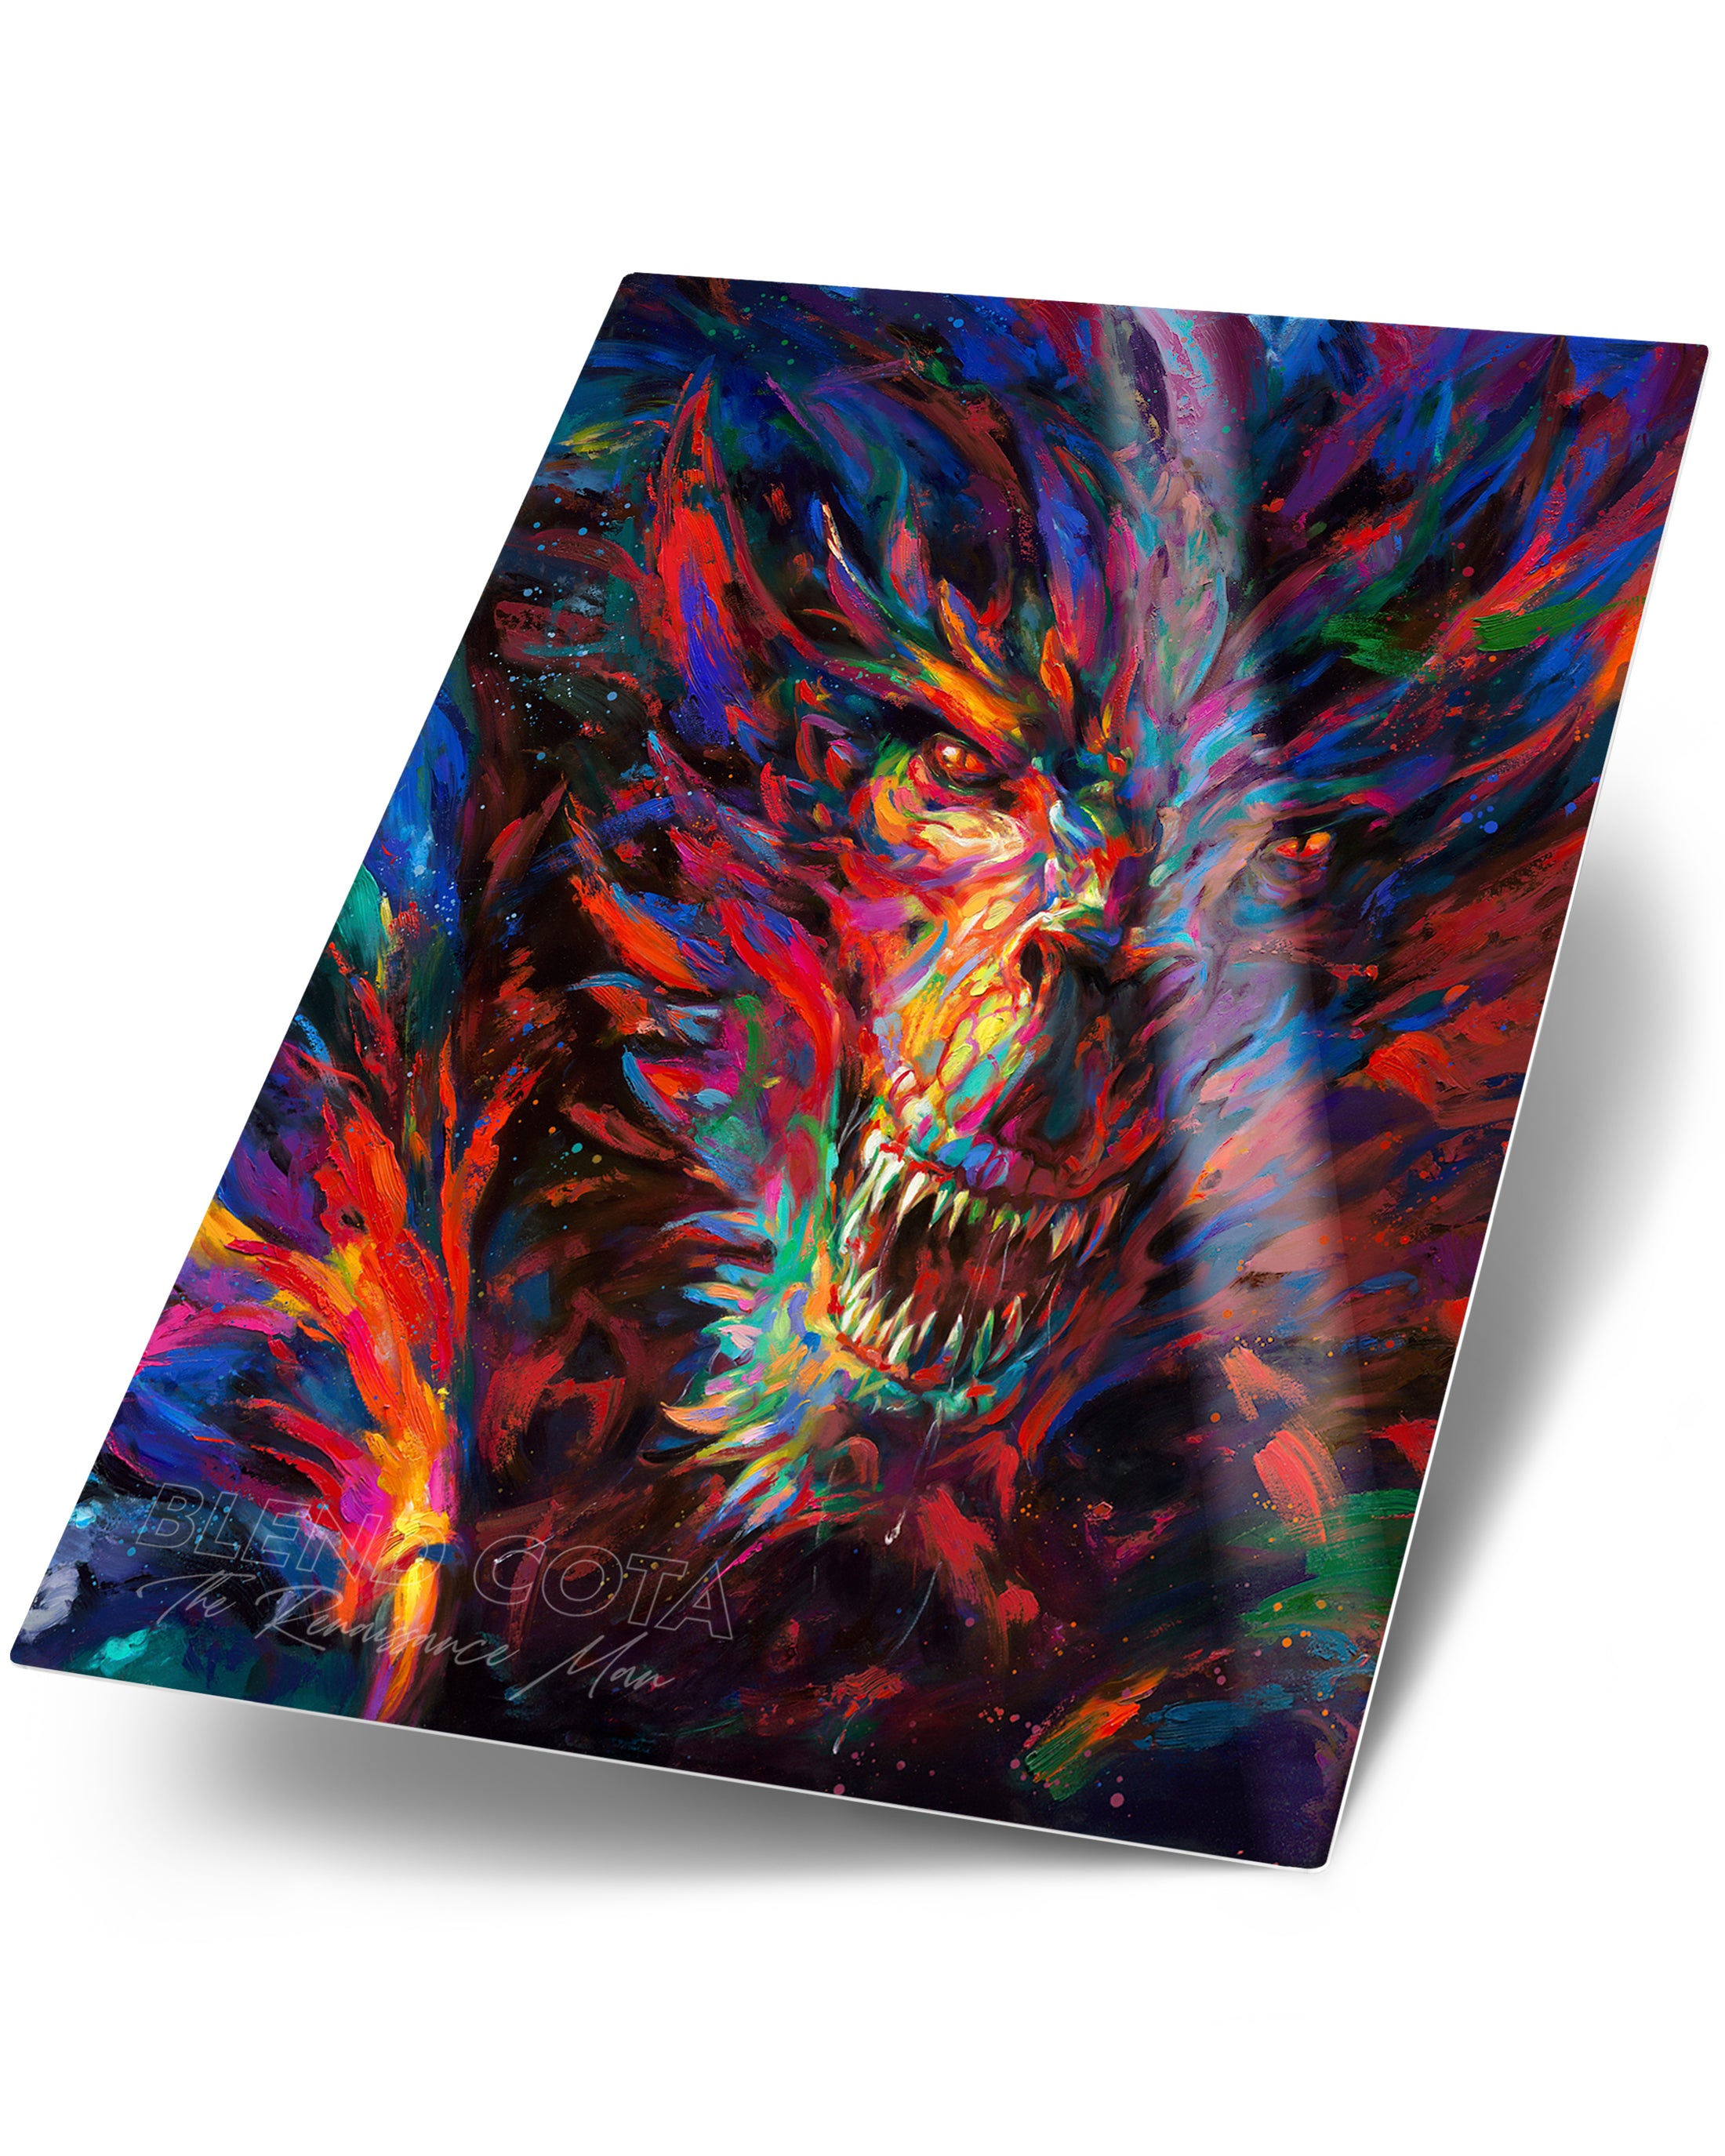 Glossy metal art print of the dragon of war, legendary mythical being engulfed in red and blue flame, emerging from darkness with colorful brushstrokes in an expressionistic style.